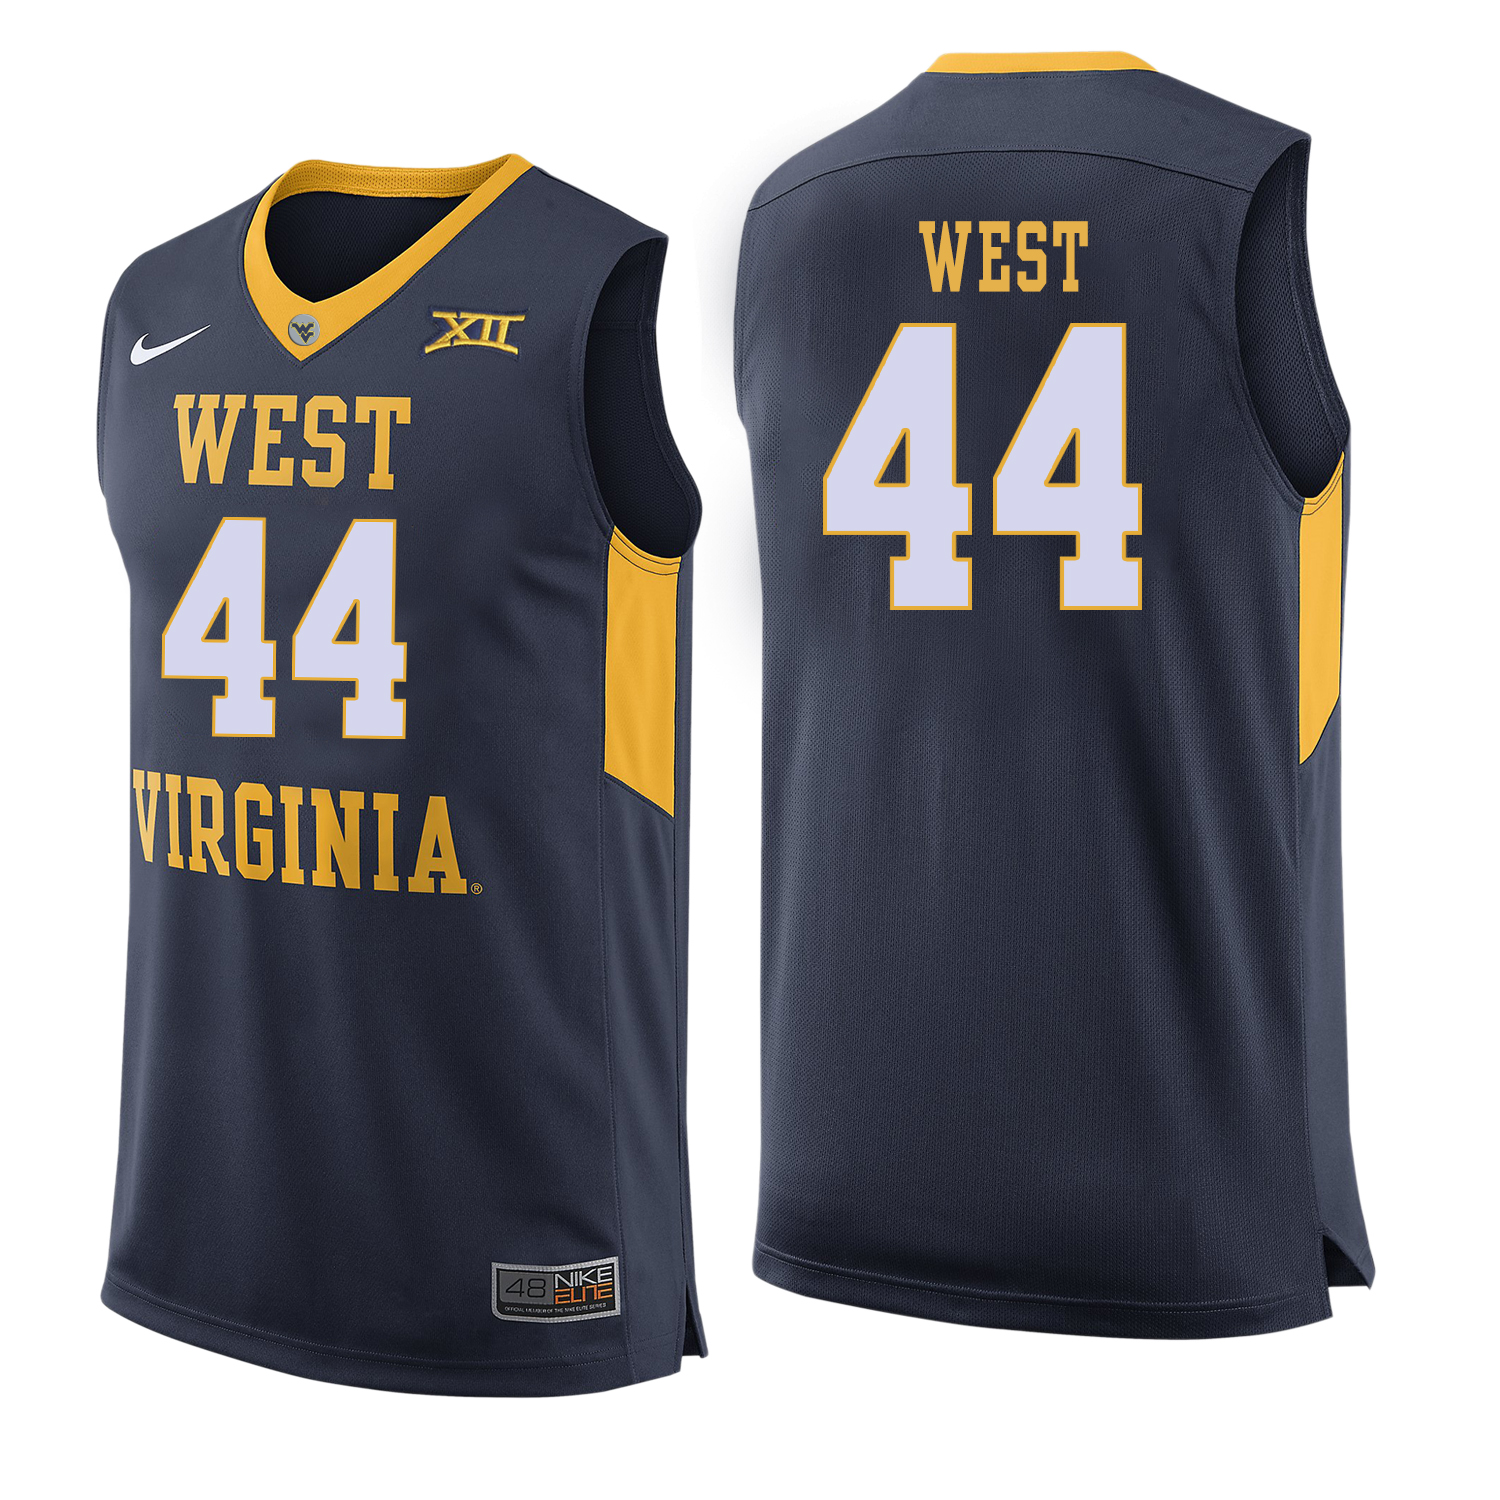 West Virginia Mountaineers 44 Jerry West Navy College Basketball Jersey